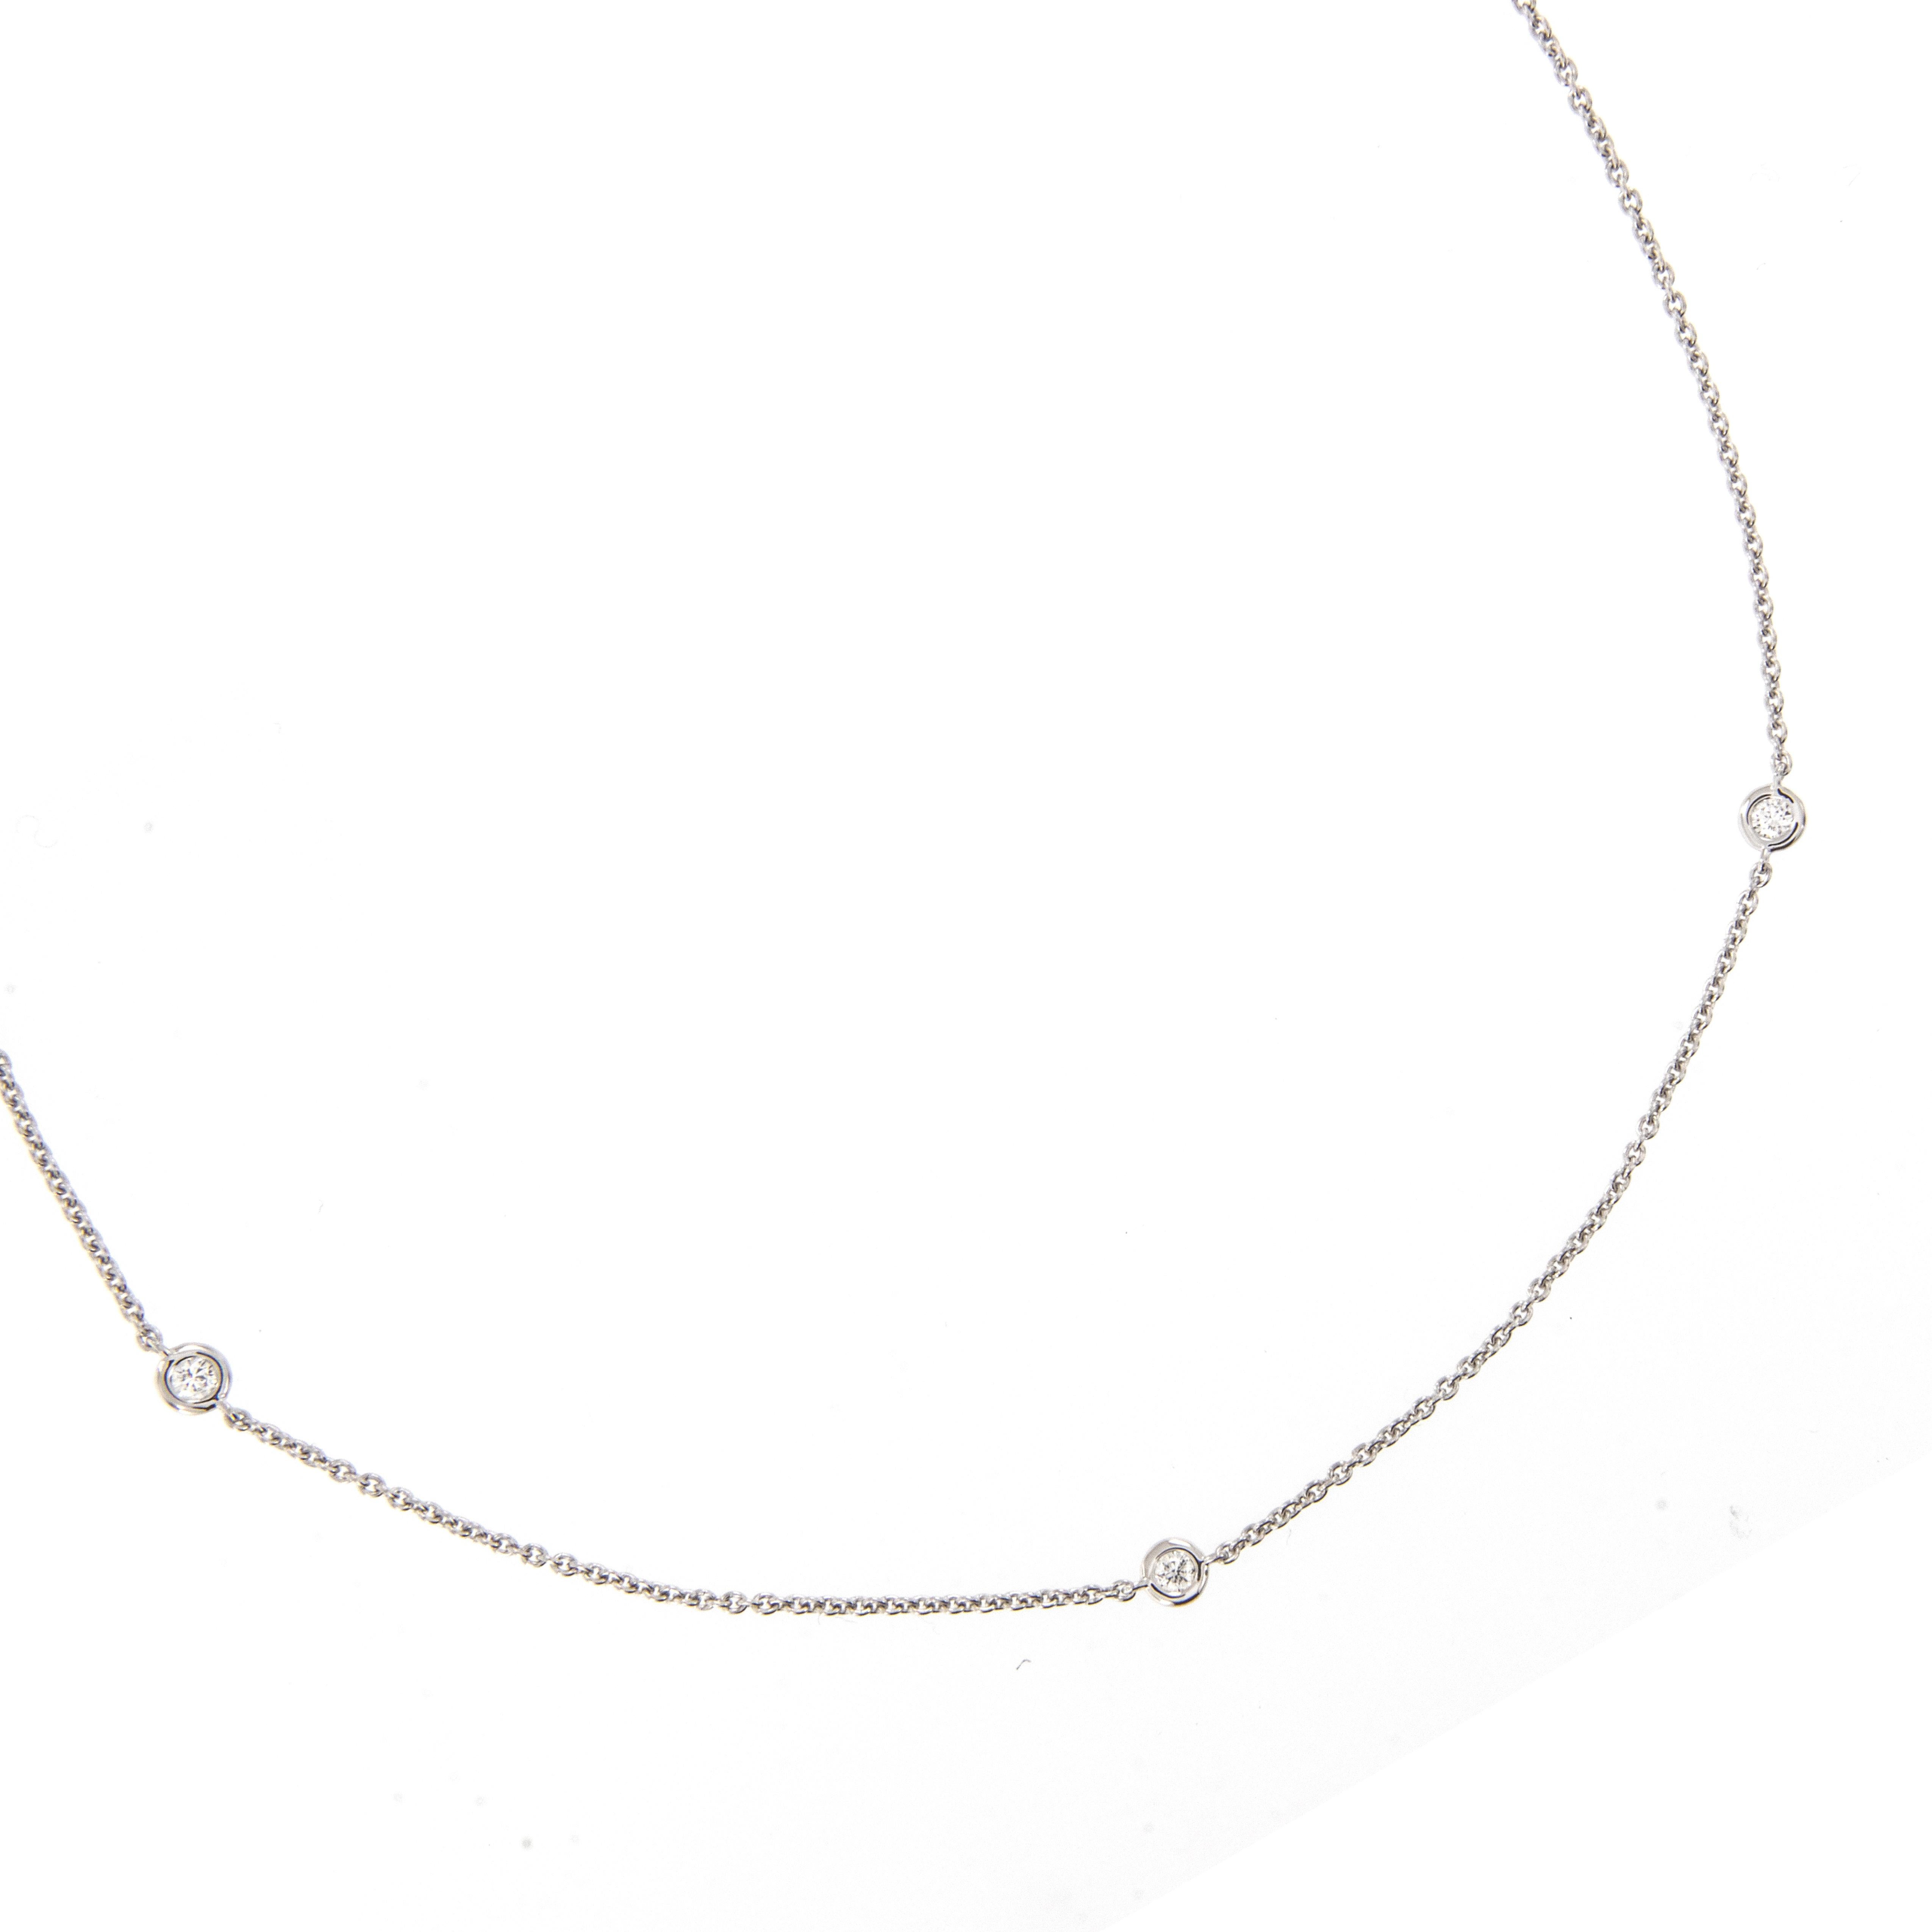 Rich 18 karat white gold with six fine quality diamonds = 0.37 Cttw (VS clarity, G-H color) this station necklace stands the test of time! You can wear every day with jeans and a t-shirt and looks fabulous with other necklaces for a stylish layered